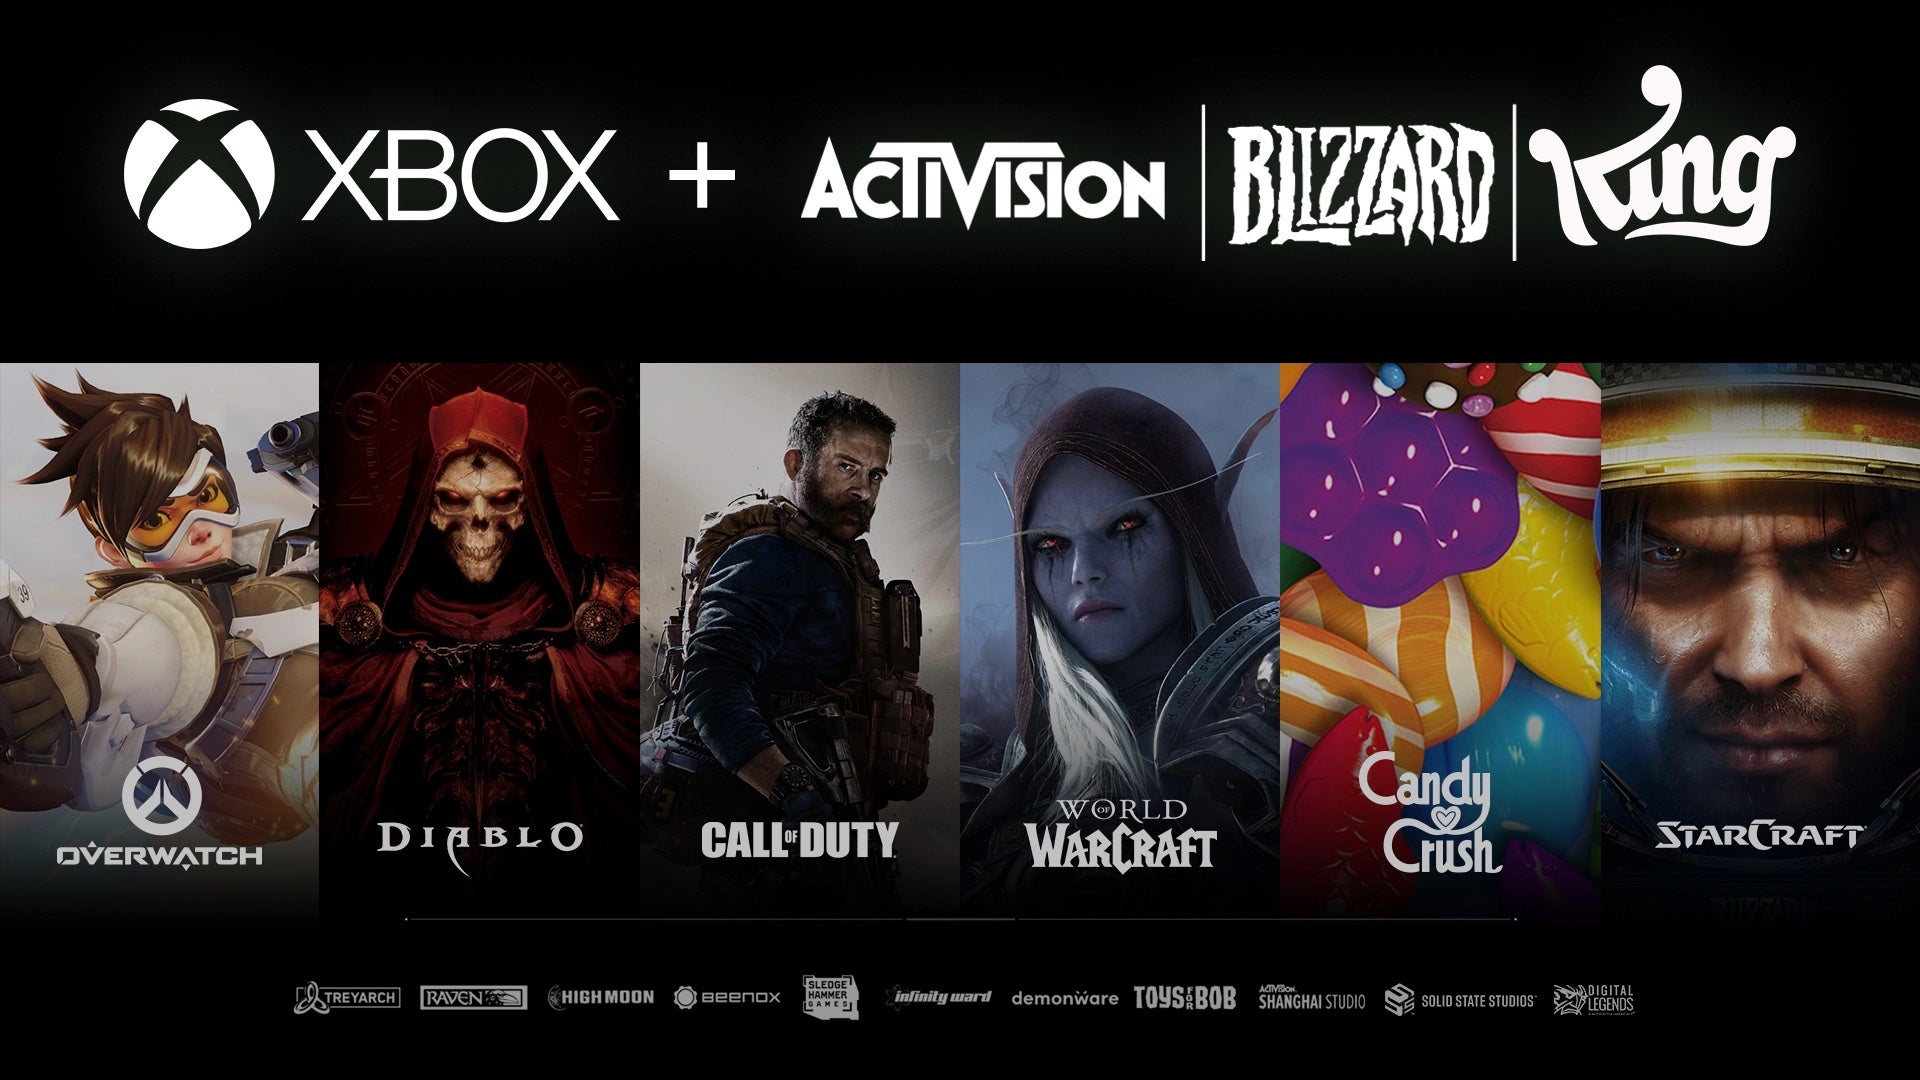 Image for Sony: "Giving Microsoft control of Activision games like Call of Duty" has "major negative implications"